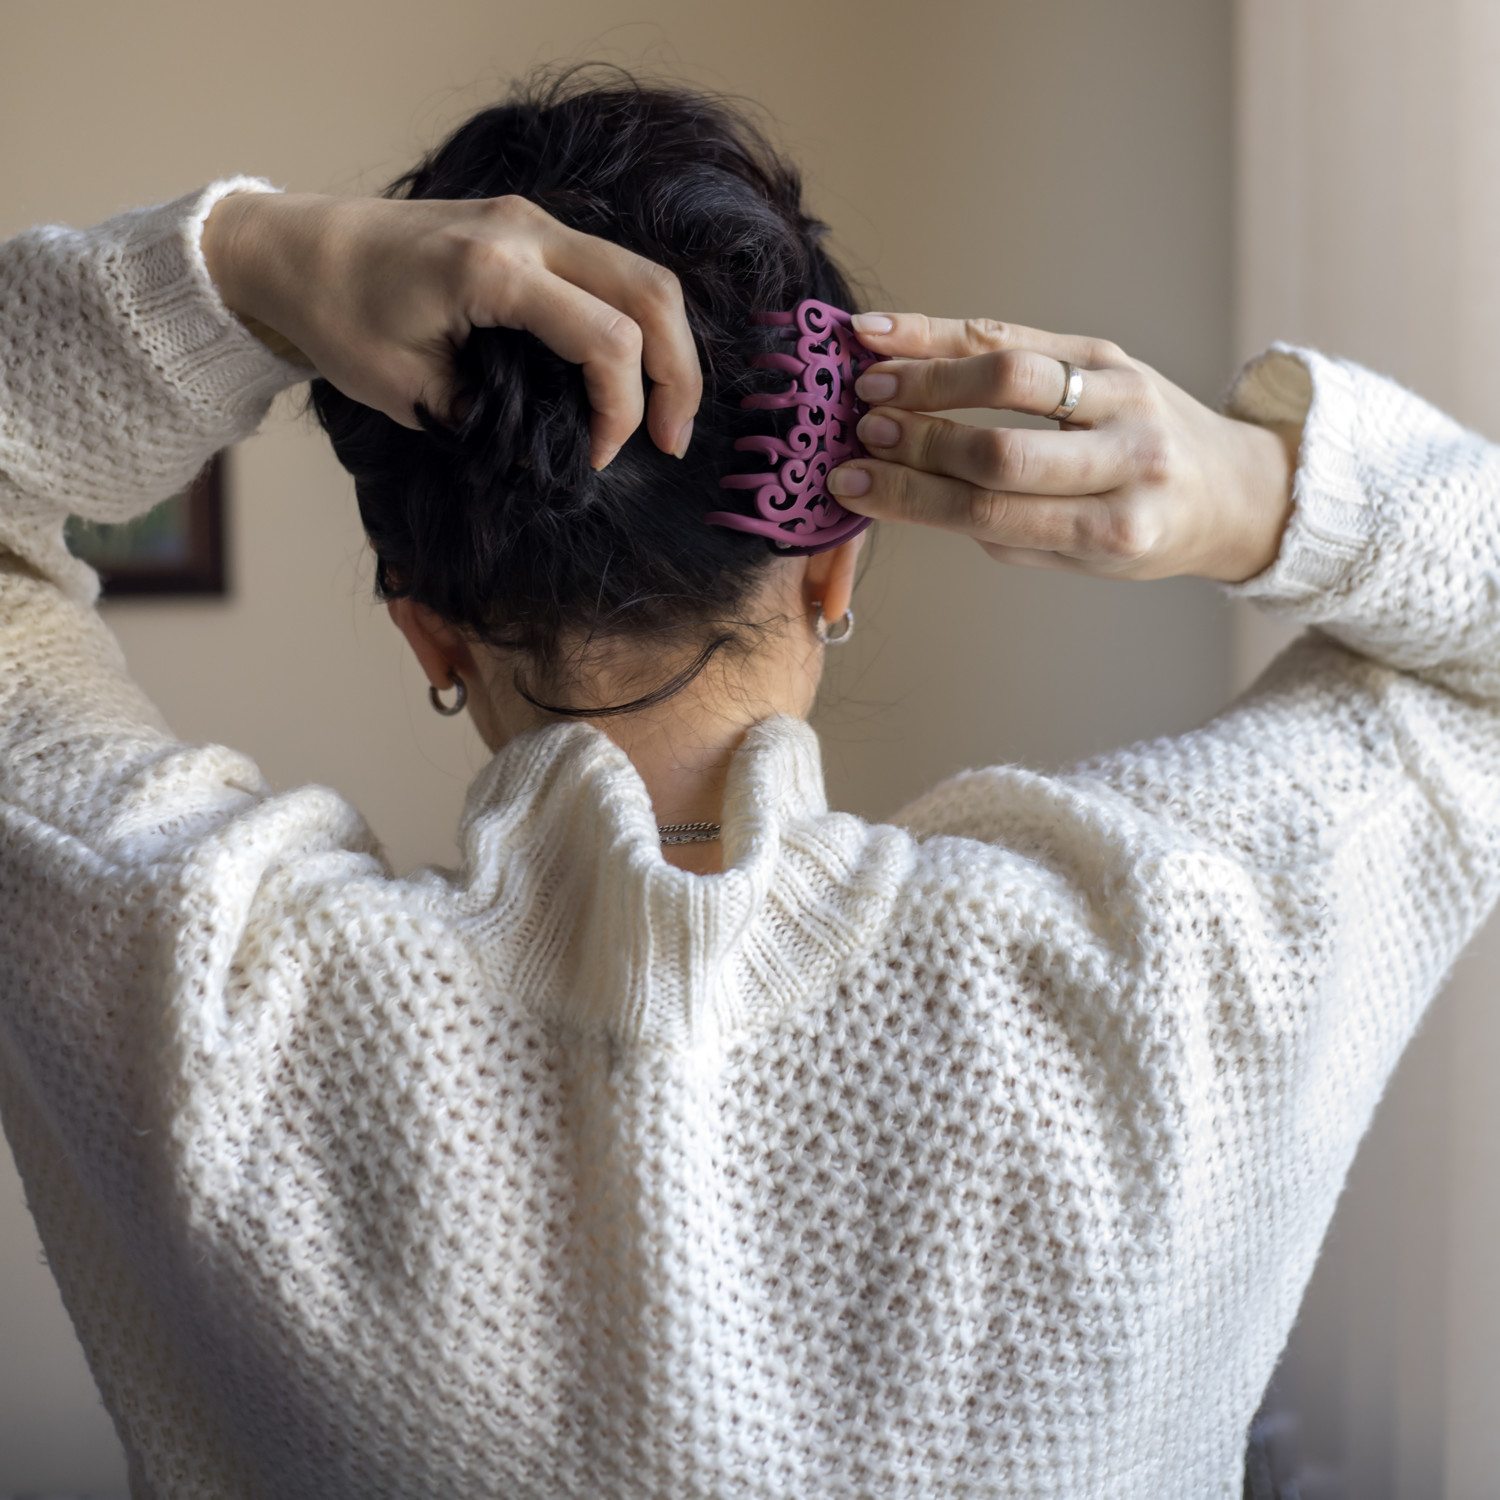 7 Easy Ways to Fix Any Bad Hair Day